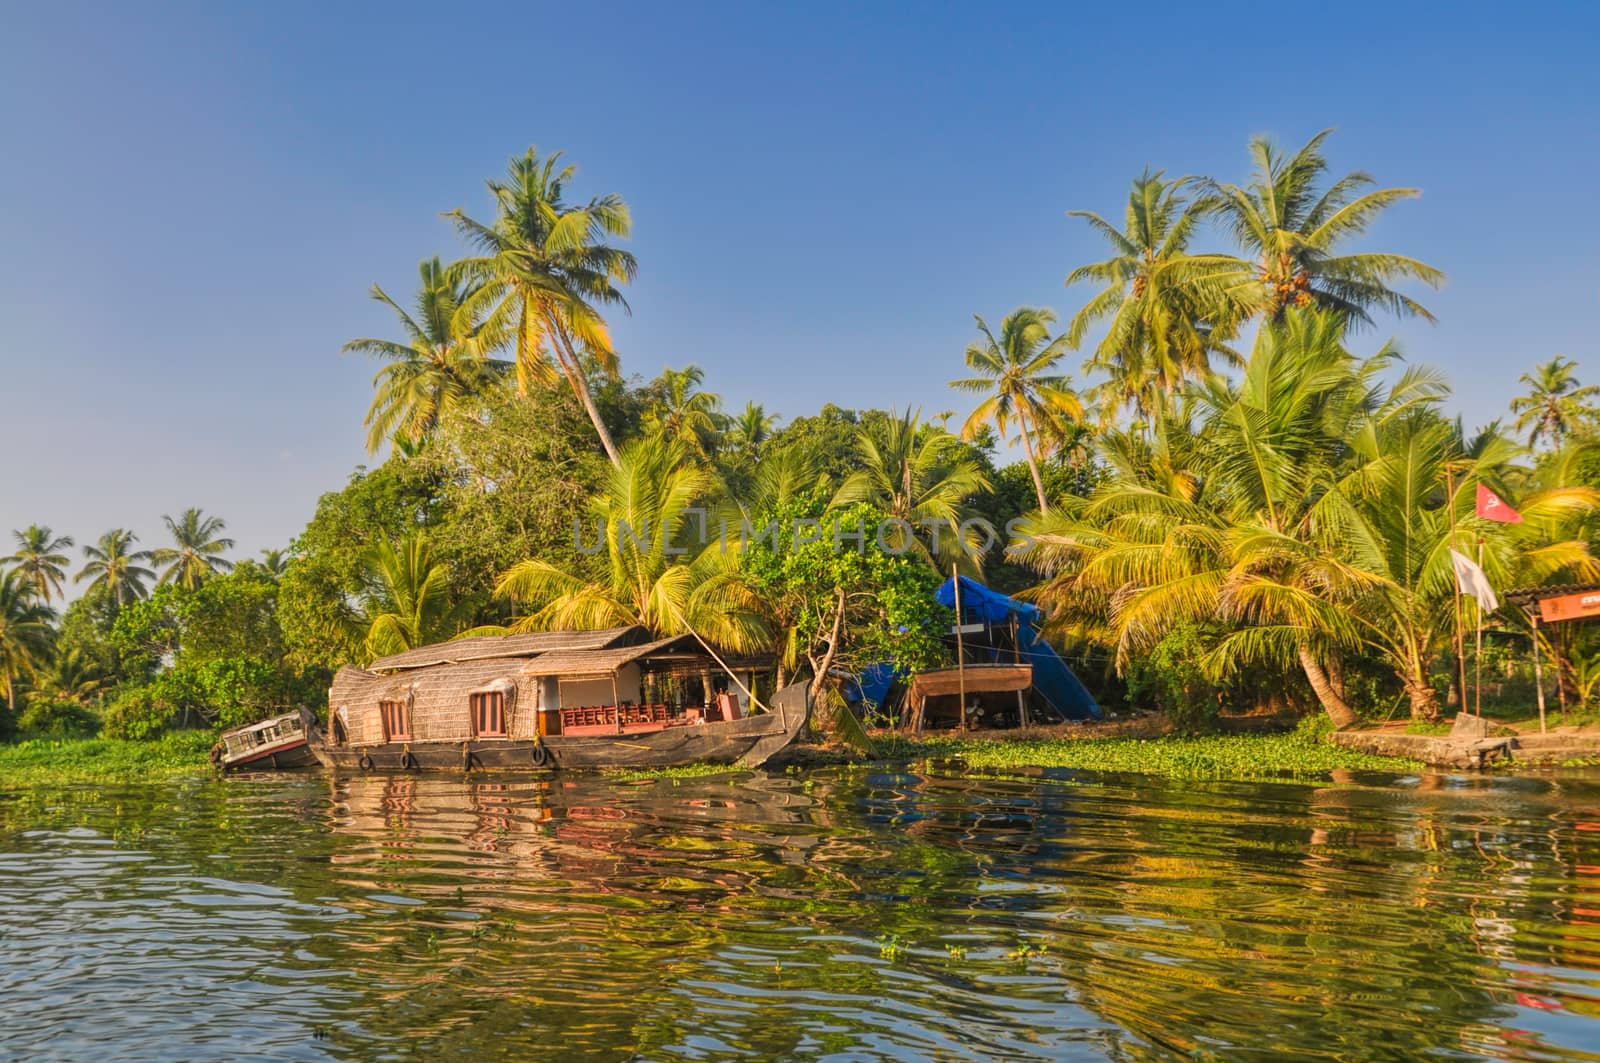 Picturesque houseboat traditional for Alleppey region in India